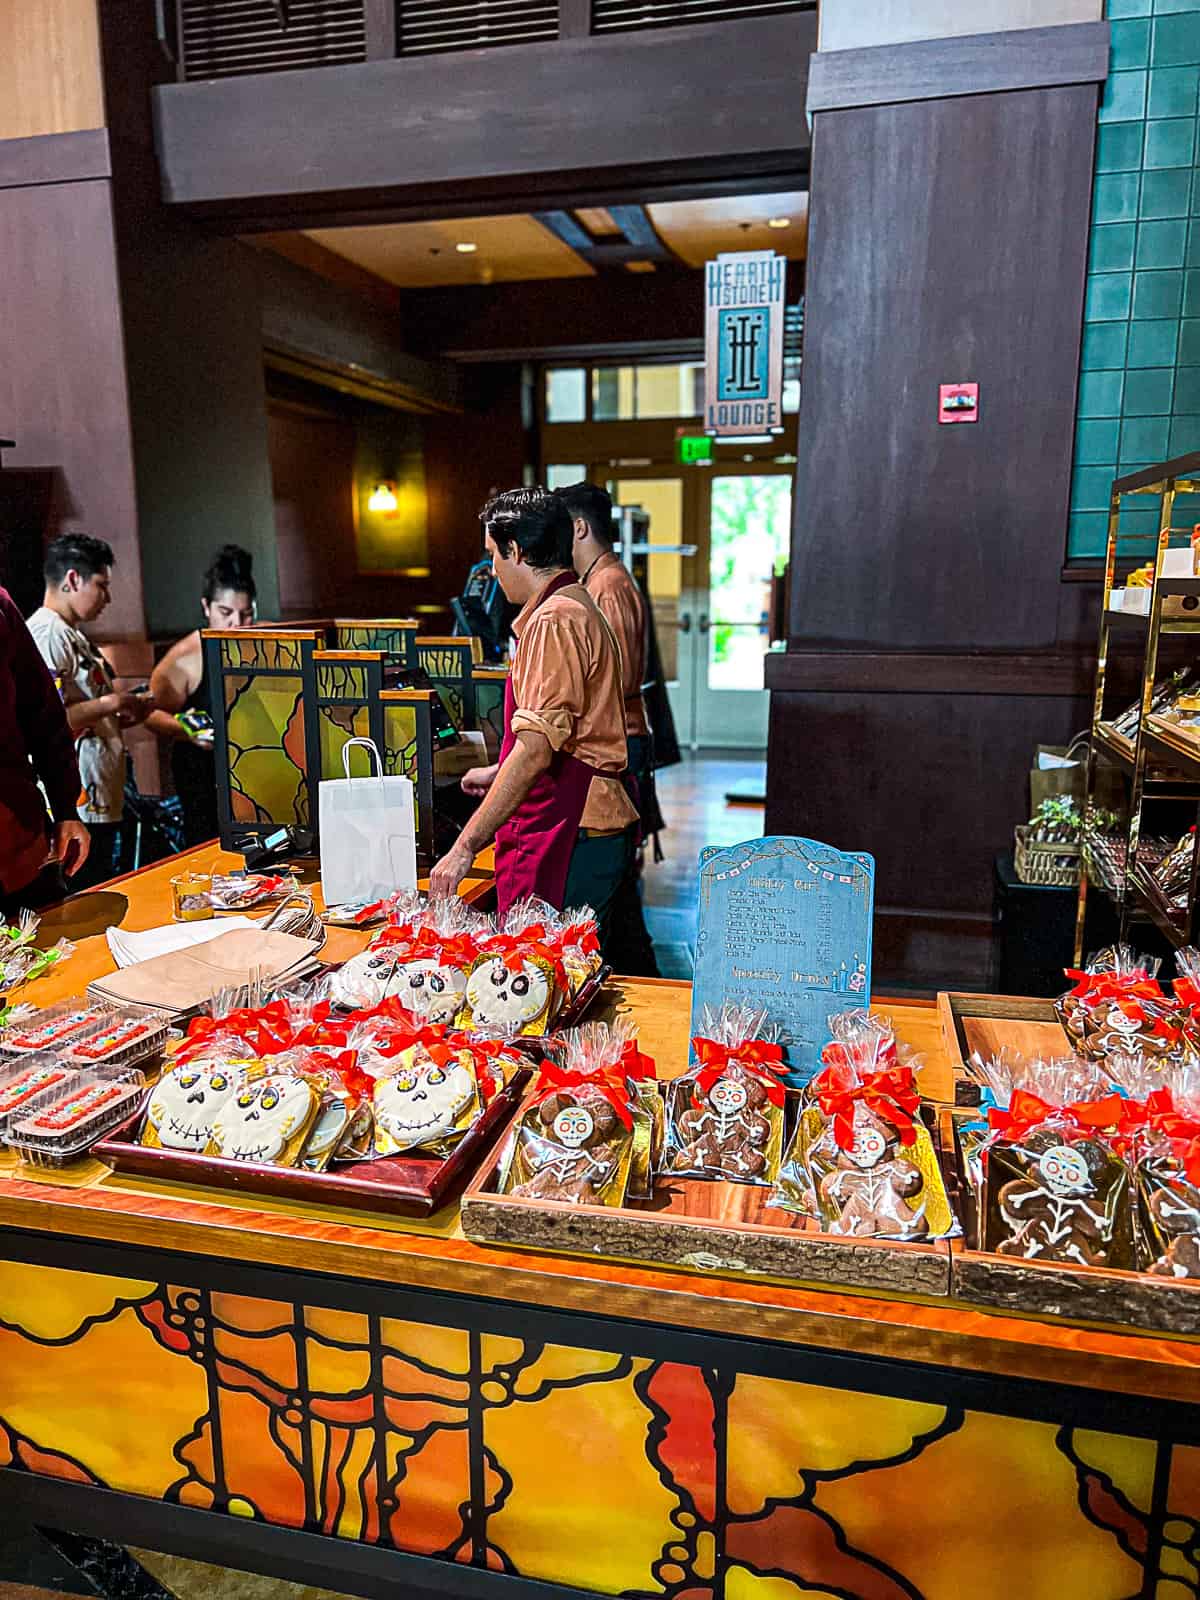 Snack Cart with Day Of The Dead Treats inside Grand Californian Hotel during Halloween Time at Disneyland